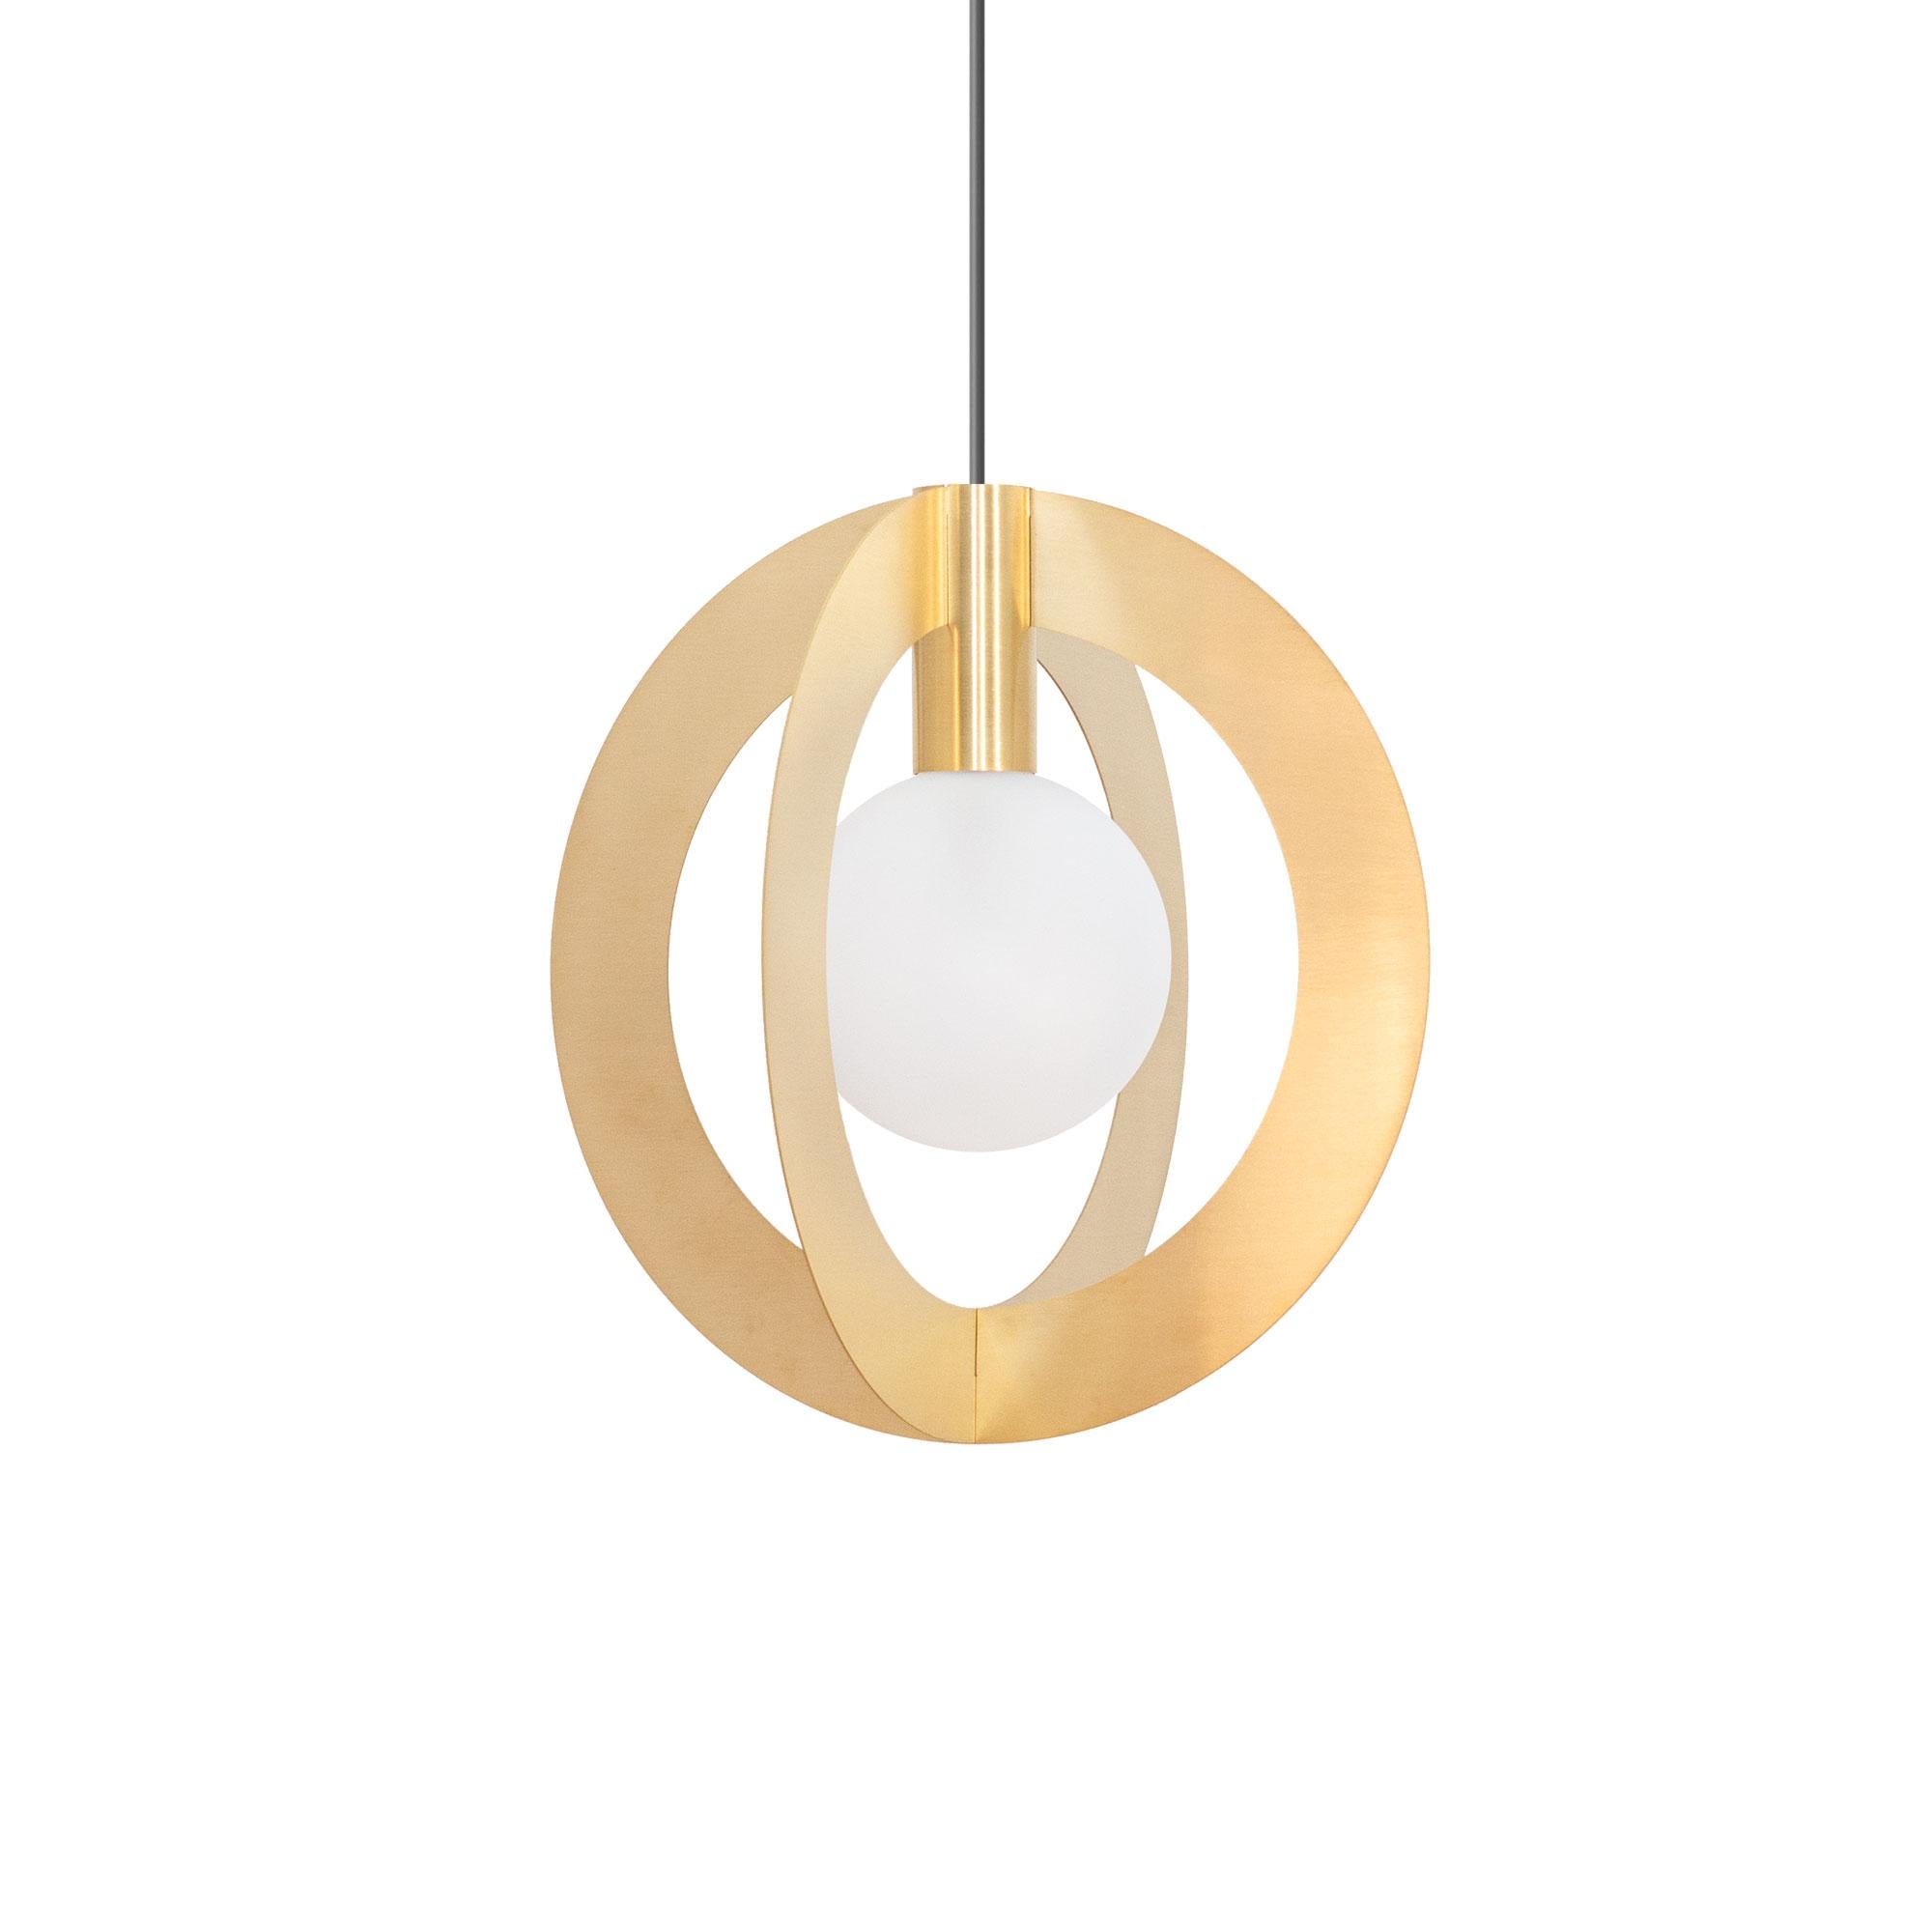 Copper Diaradius small light by Atris
Materials: copper, satin glass
Also available in steel and brass.
Dimensions: H 32 x D 32 cm
Also available in H 39 x D 39 cm.

We are the preachers of honest design, and we like to emphasize the beauty of